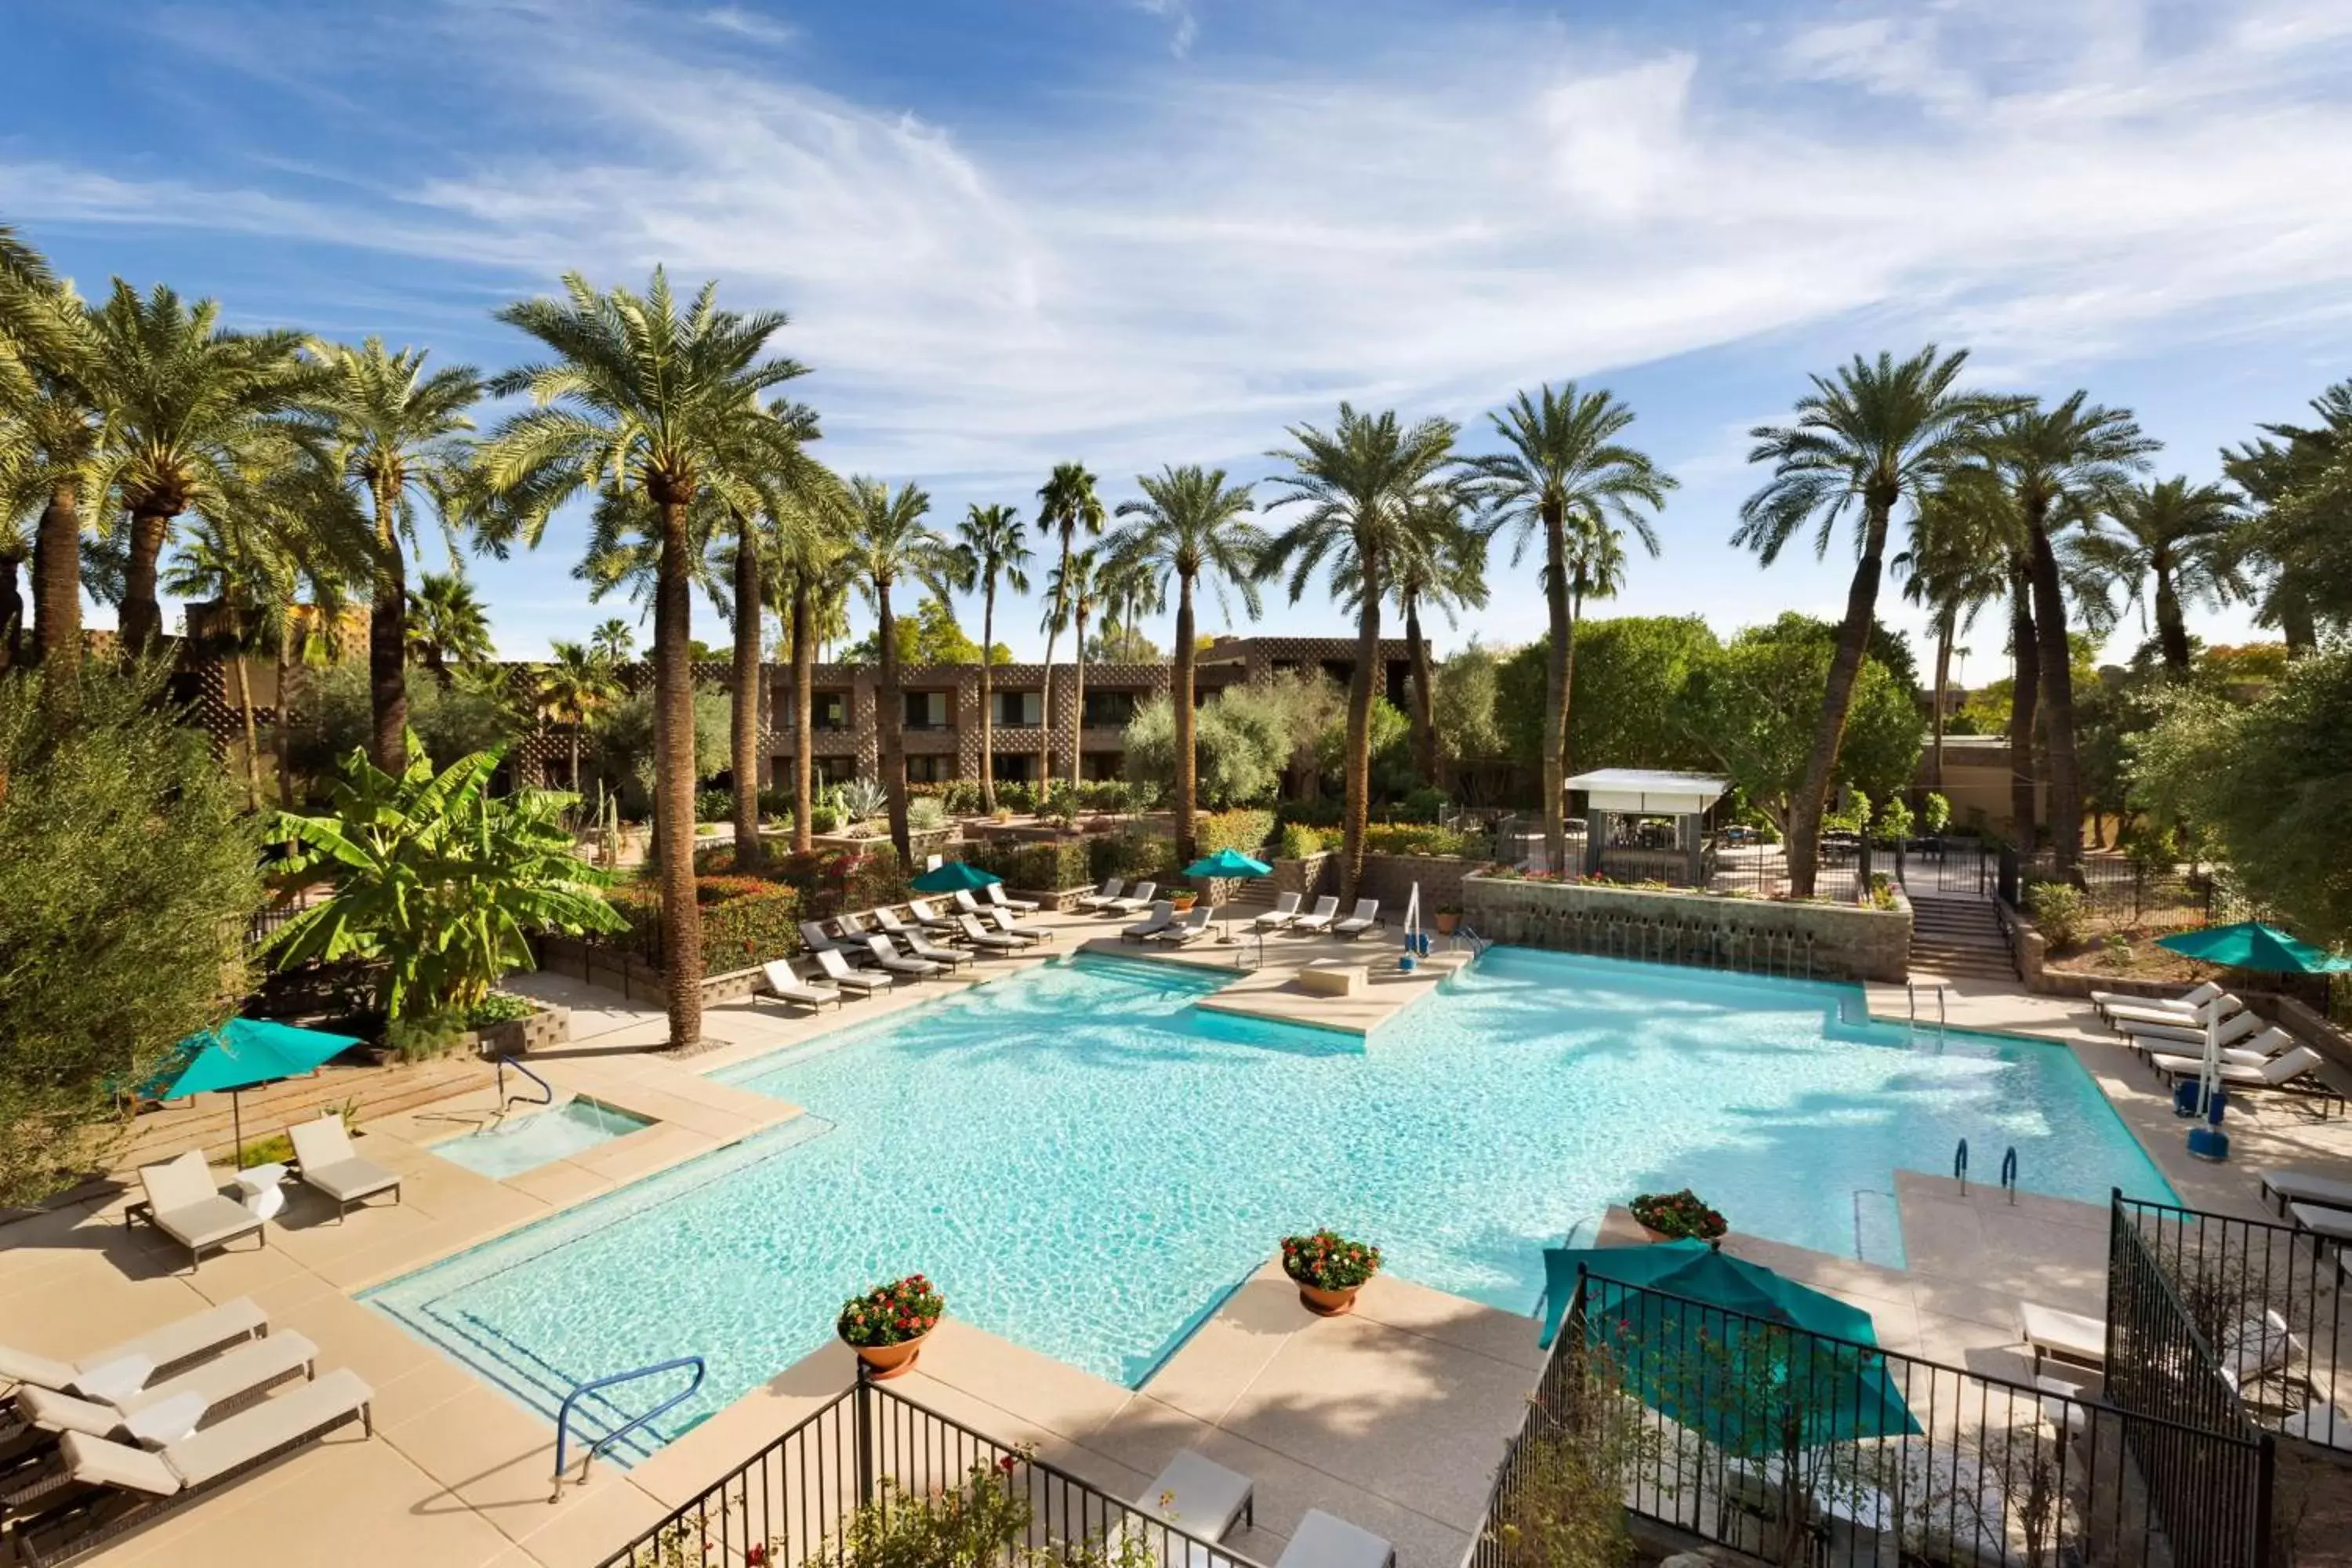 Property building, Pool View in DoubleTree by Hilton Paradise Valley Resort Scottsdale